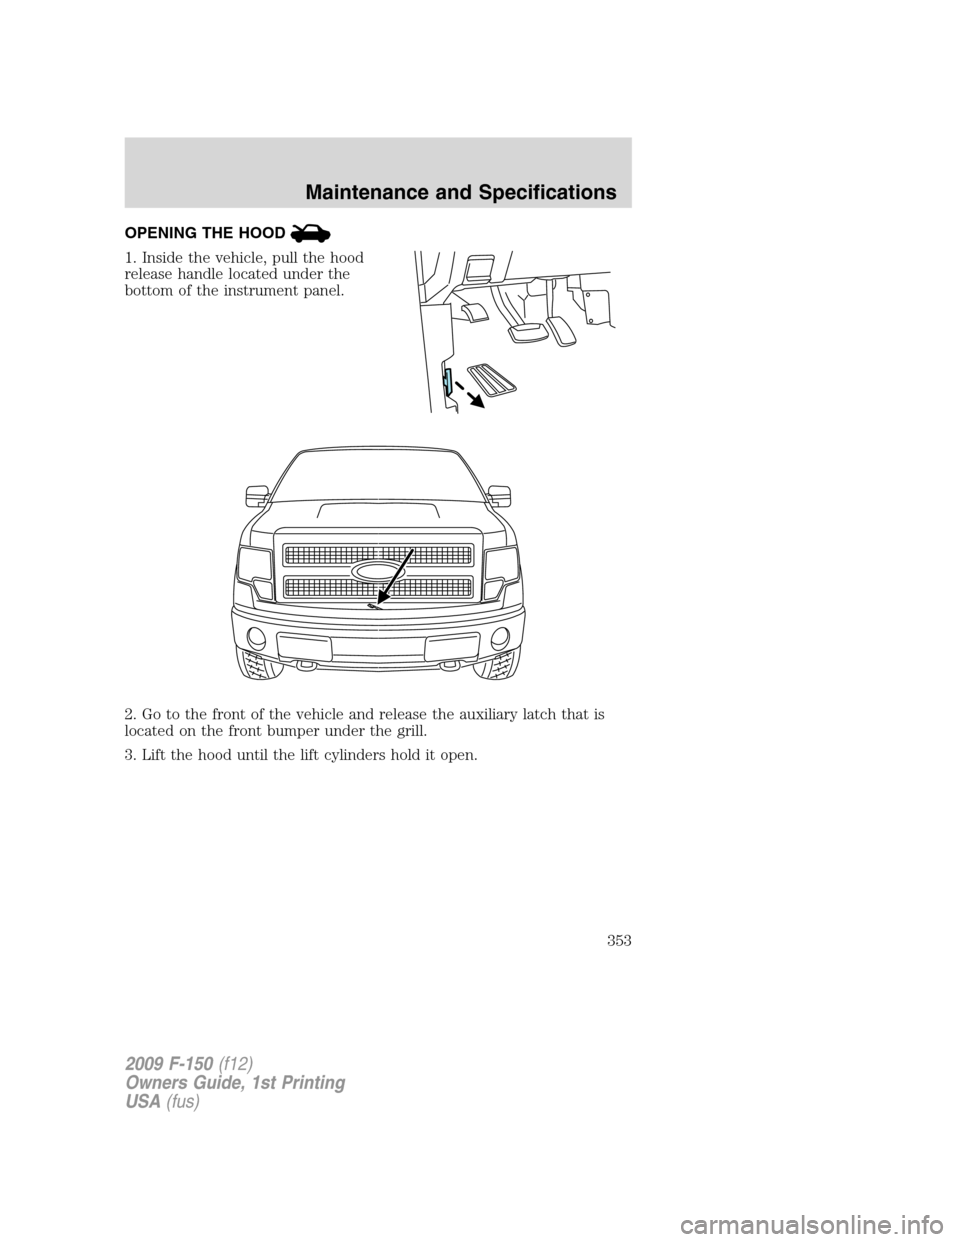 FORD F150 2009 12.G Owners Manual OPENING THE HOOD
1. Inside the vehicle, pull the hood
release handle located under the
bottom of the instrument panel.
2. Go to the front of the vehicle and release the auxiliary latch that is
located